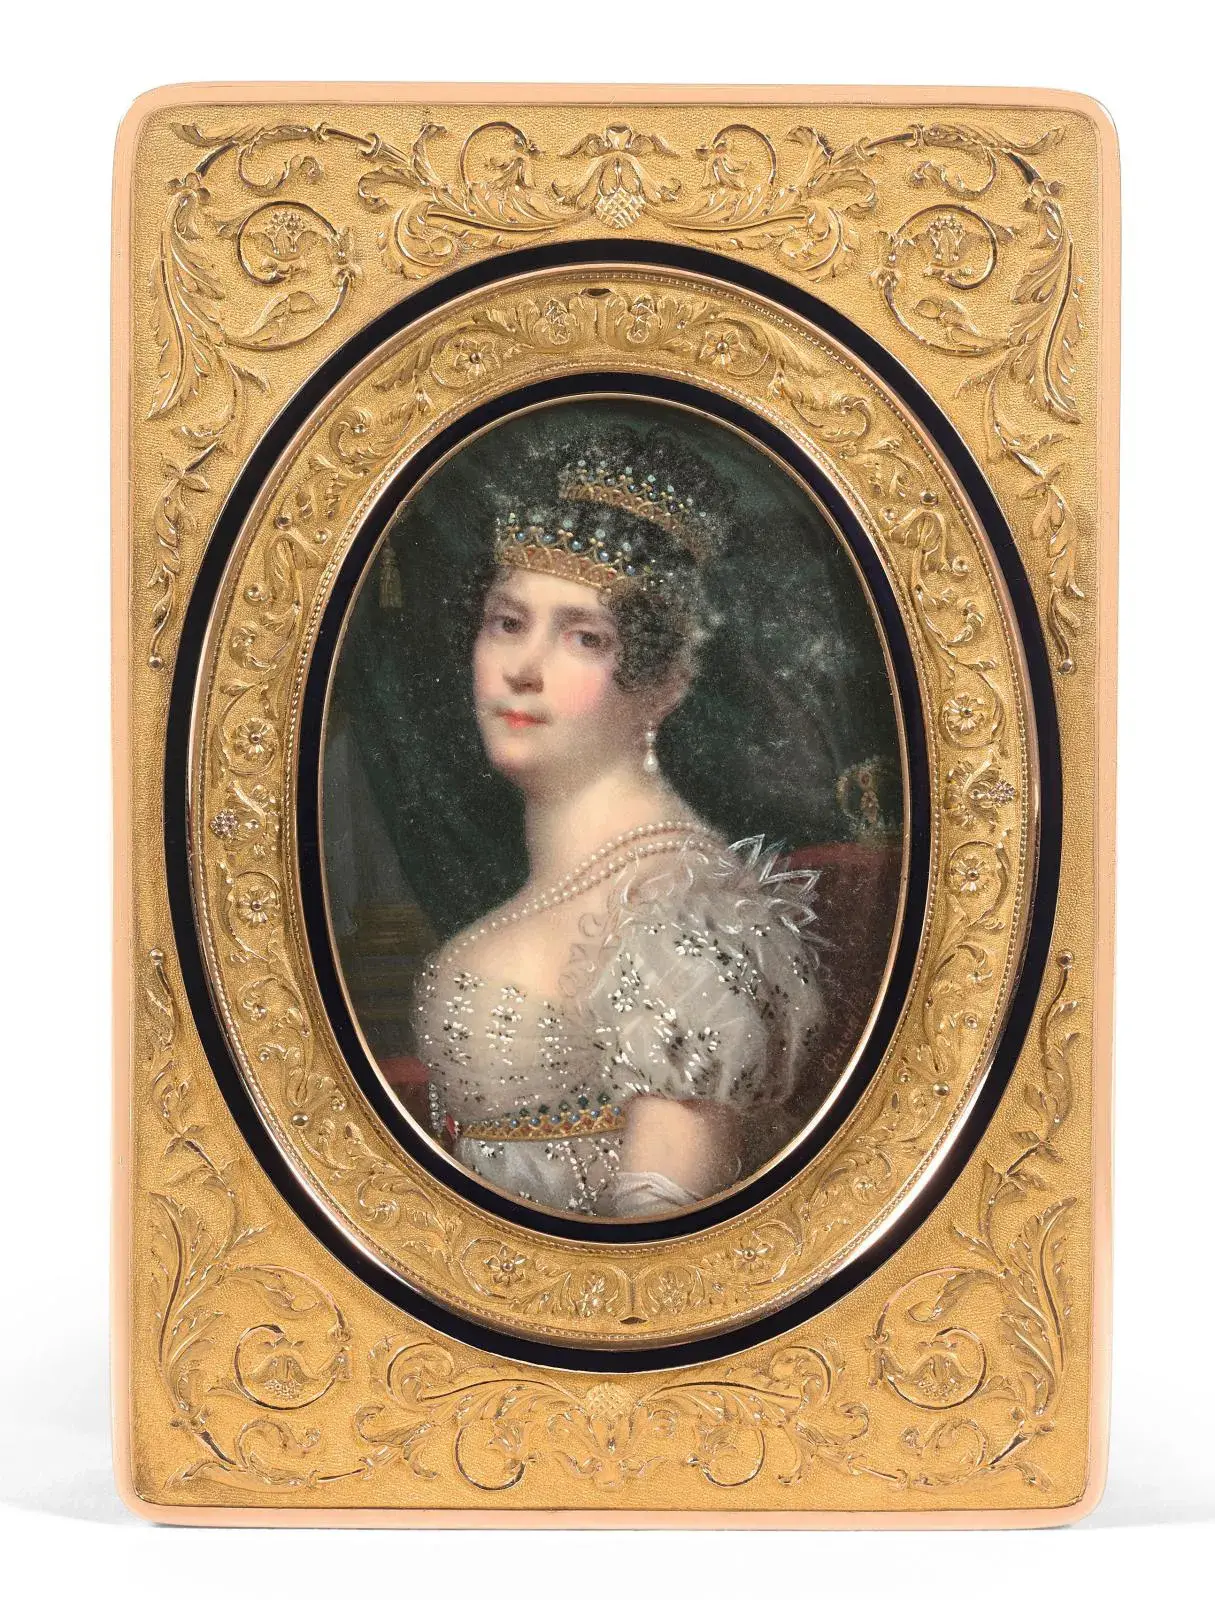 Gold and blue enamel snuffbox with the hallmark of Gabriel-Raoul Morel (1764-1832), decorated with a miniature of Empress Josephine by Paul Louis Quaglia (1780-1853), 8.5 x 6 cm/3.1 x 2.4 in. Hôtel Drouot, March 5, 2020. Fraysse & Associés Auction House.
Sold for €120,274